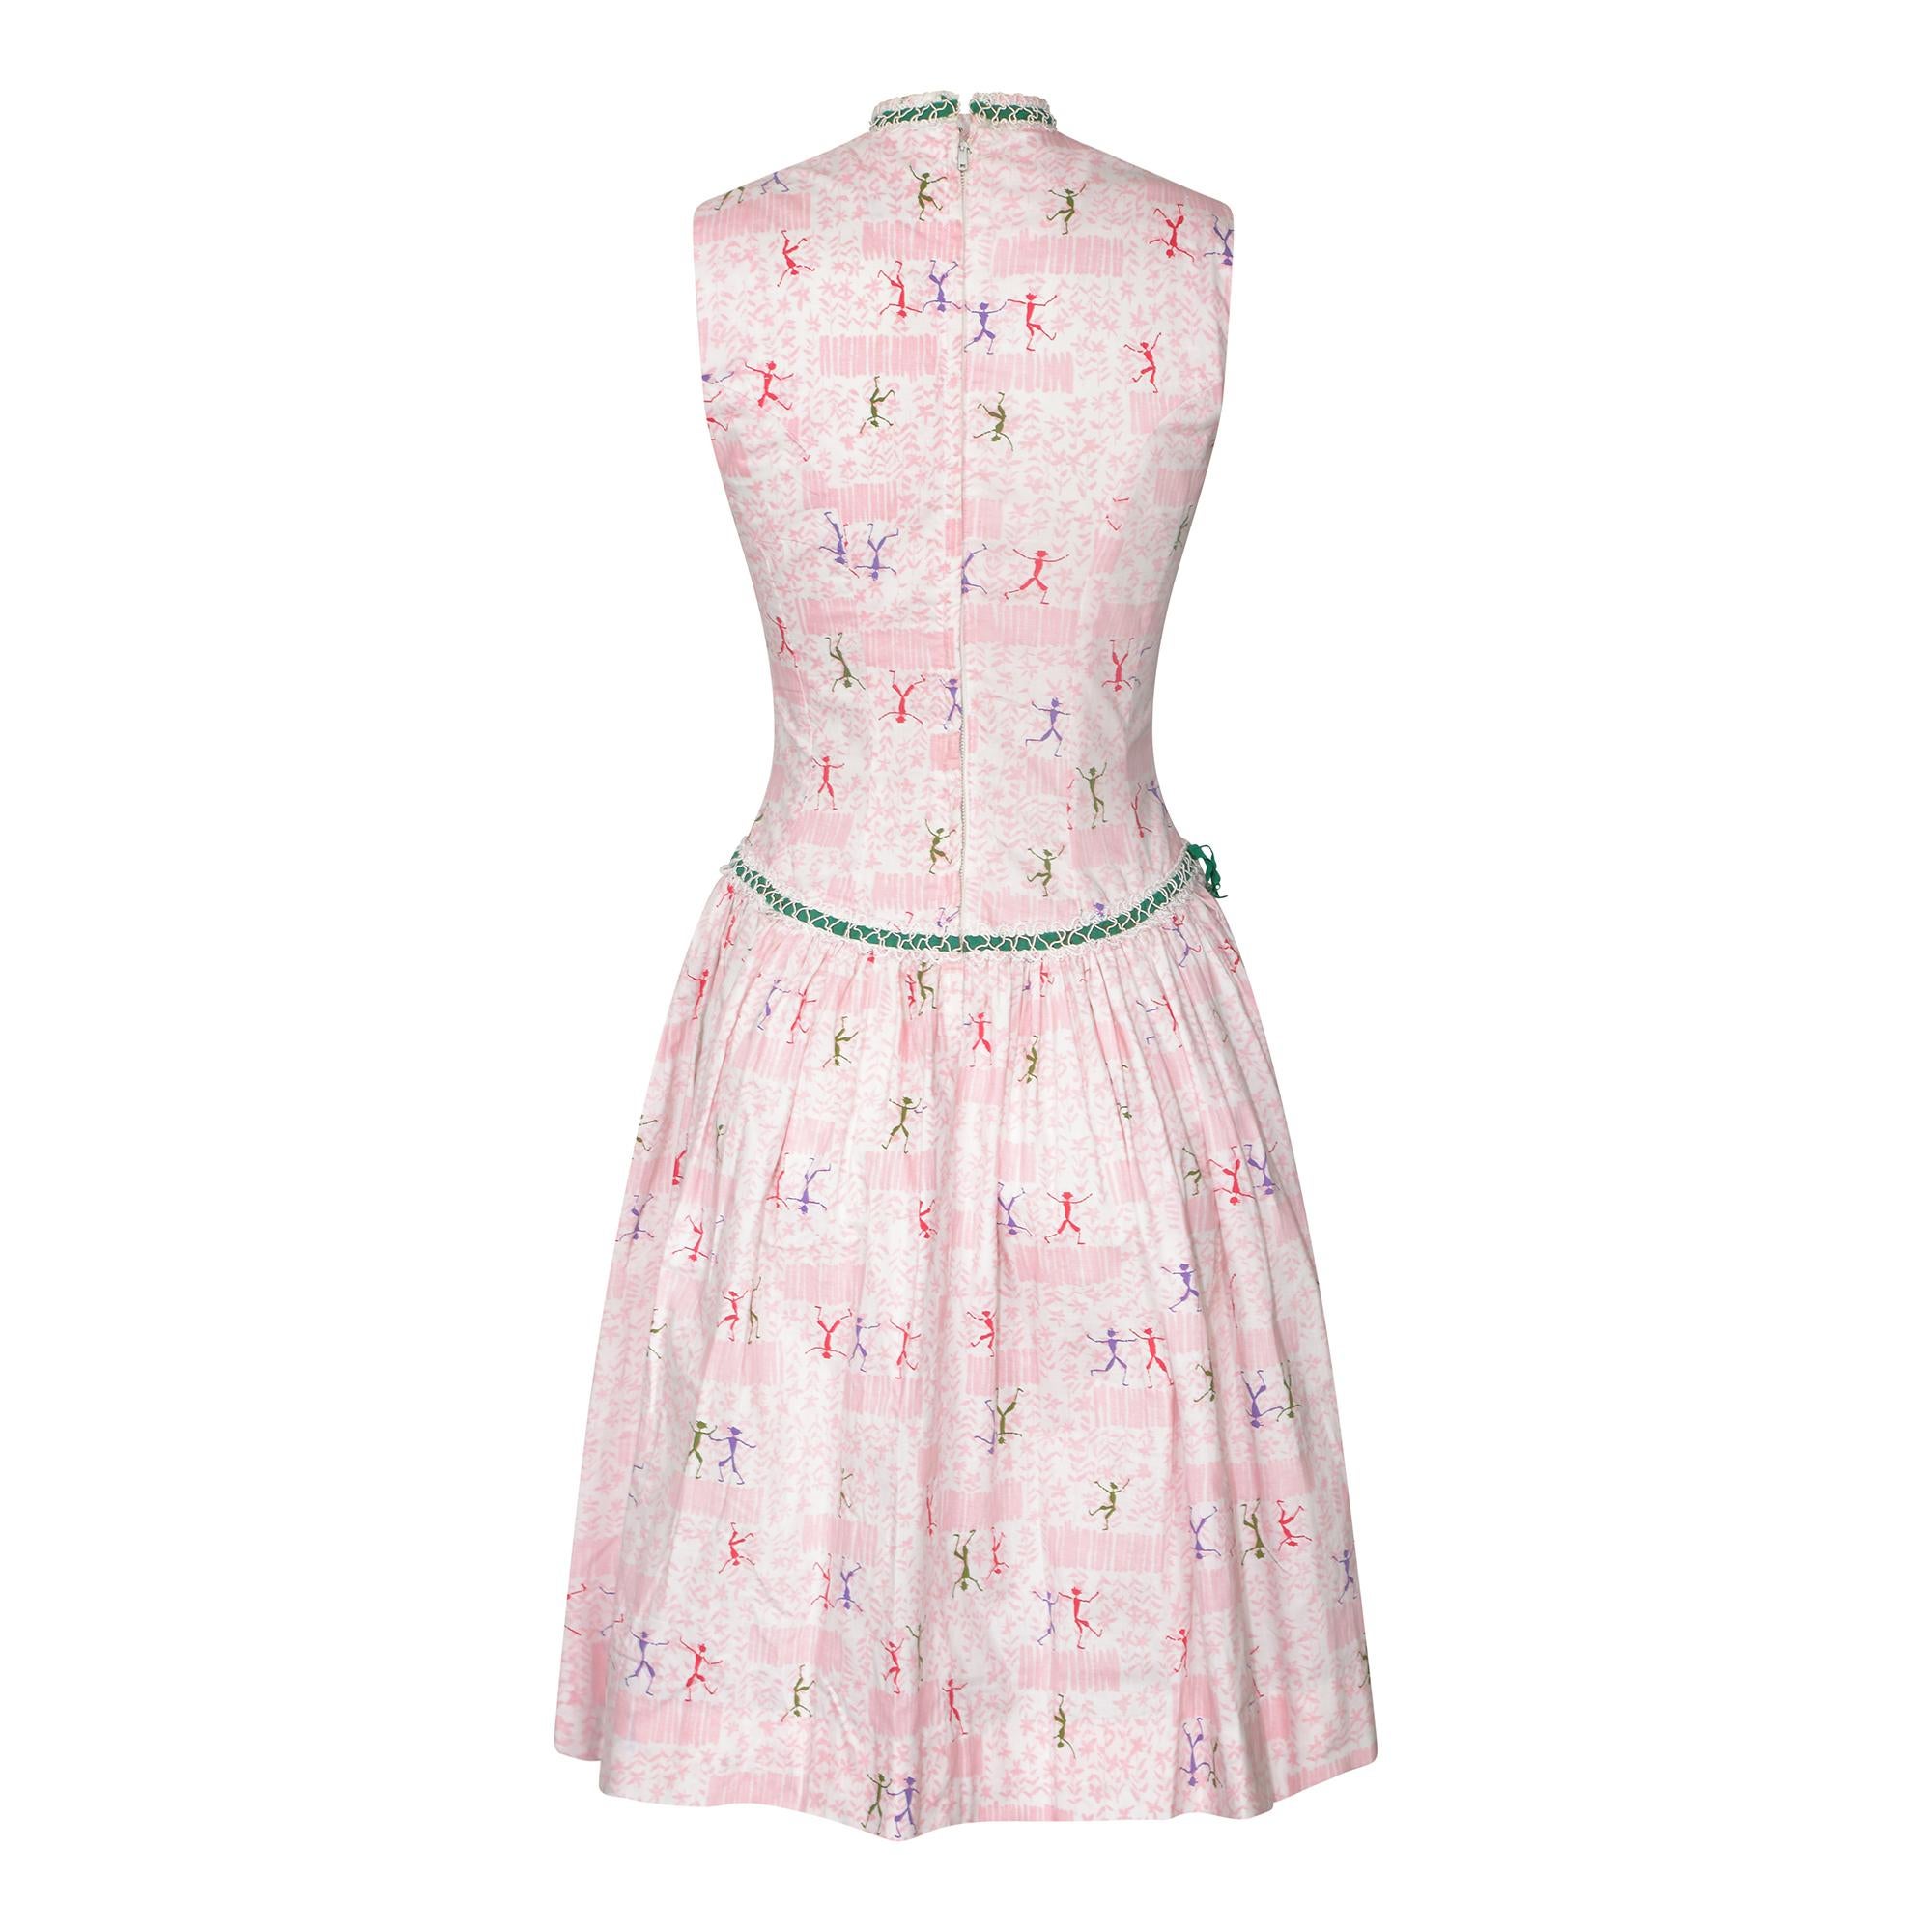 This is an absolutely super original 1950s dress with the label Teena Paige Fashions. The print really is a delight and features a pink floral garden scene background with a duo and sometimes a trio of dancing man figures in purple, green and red.